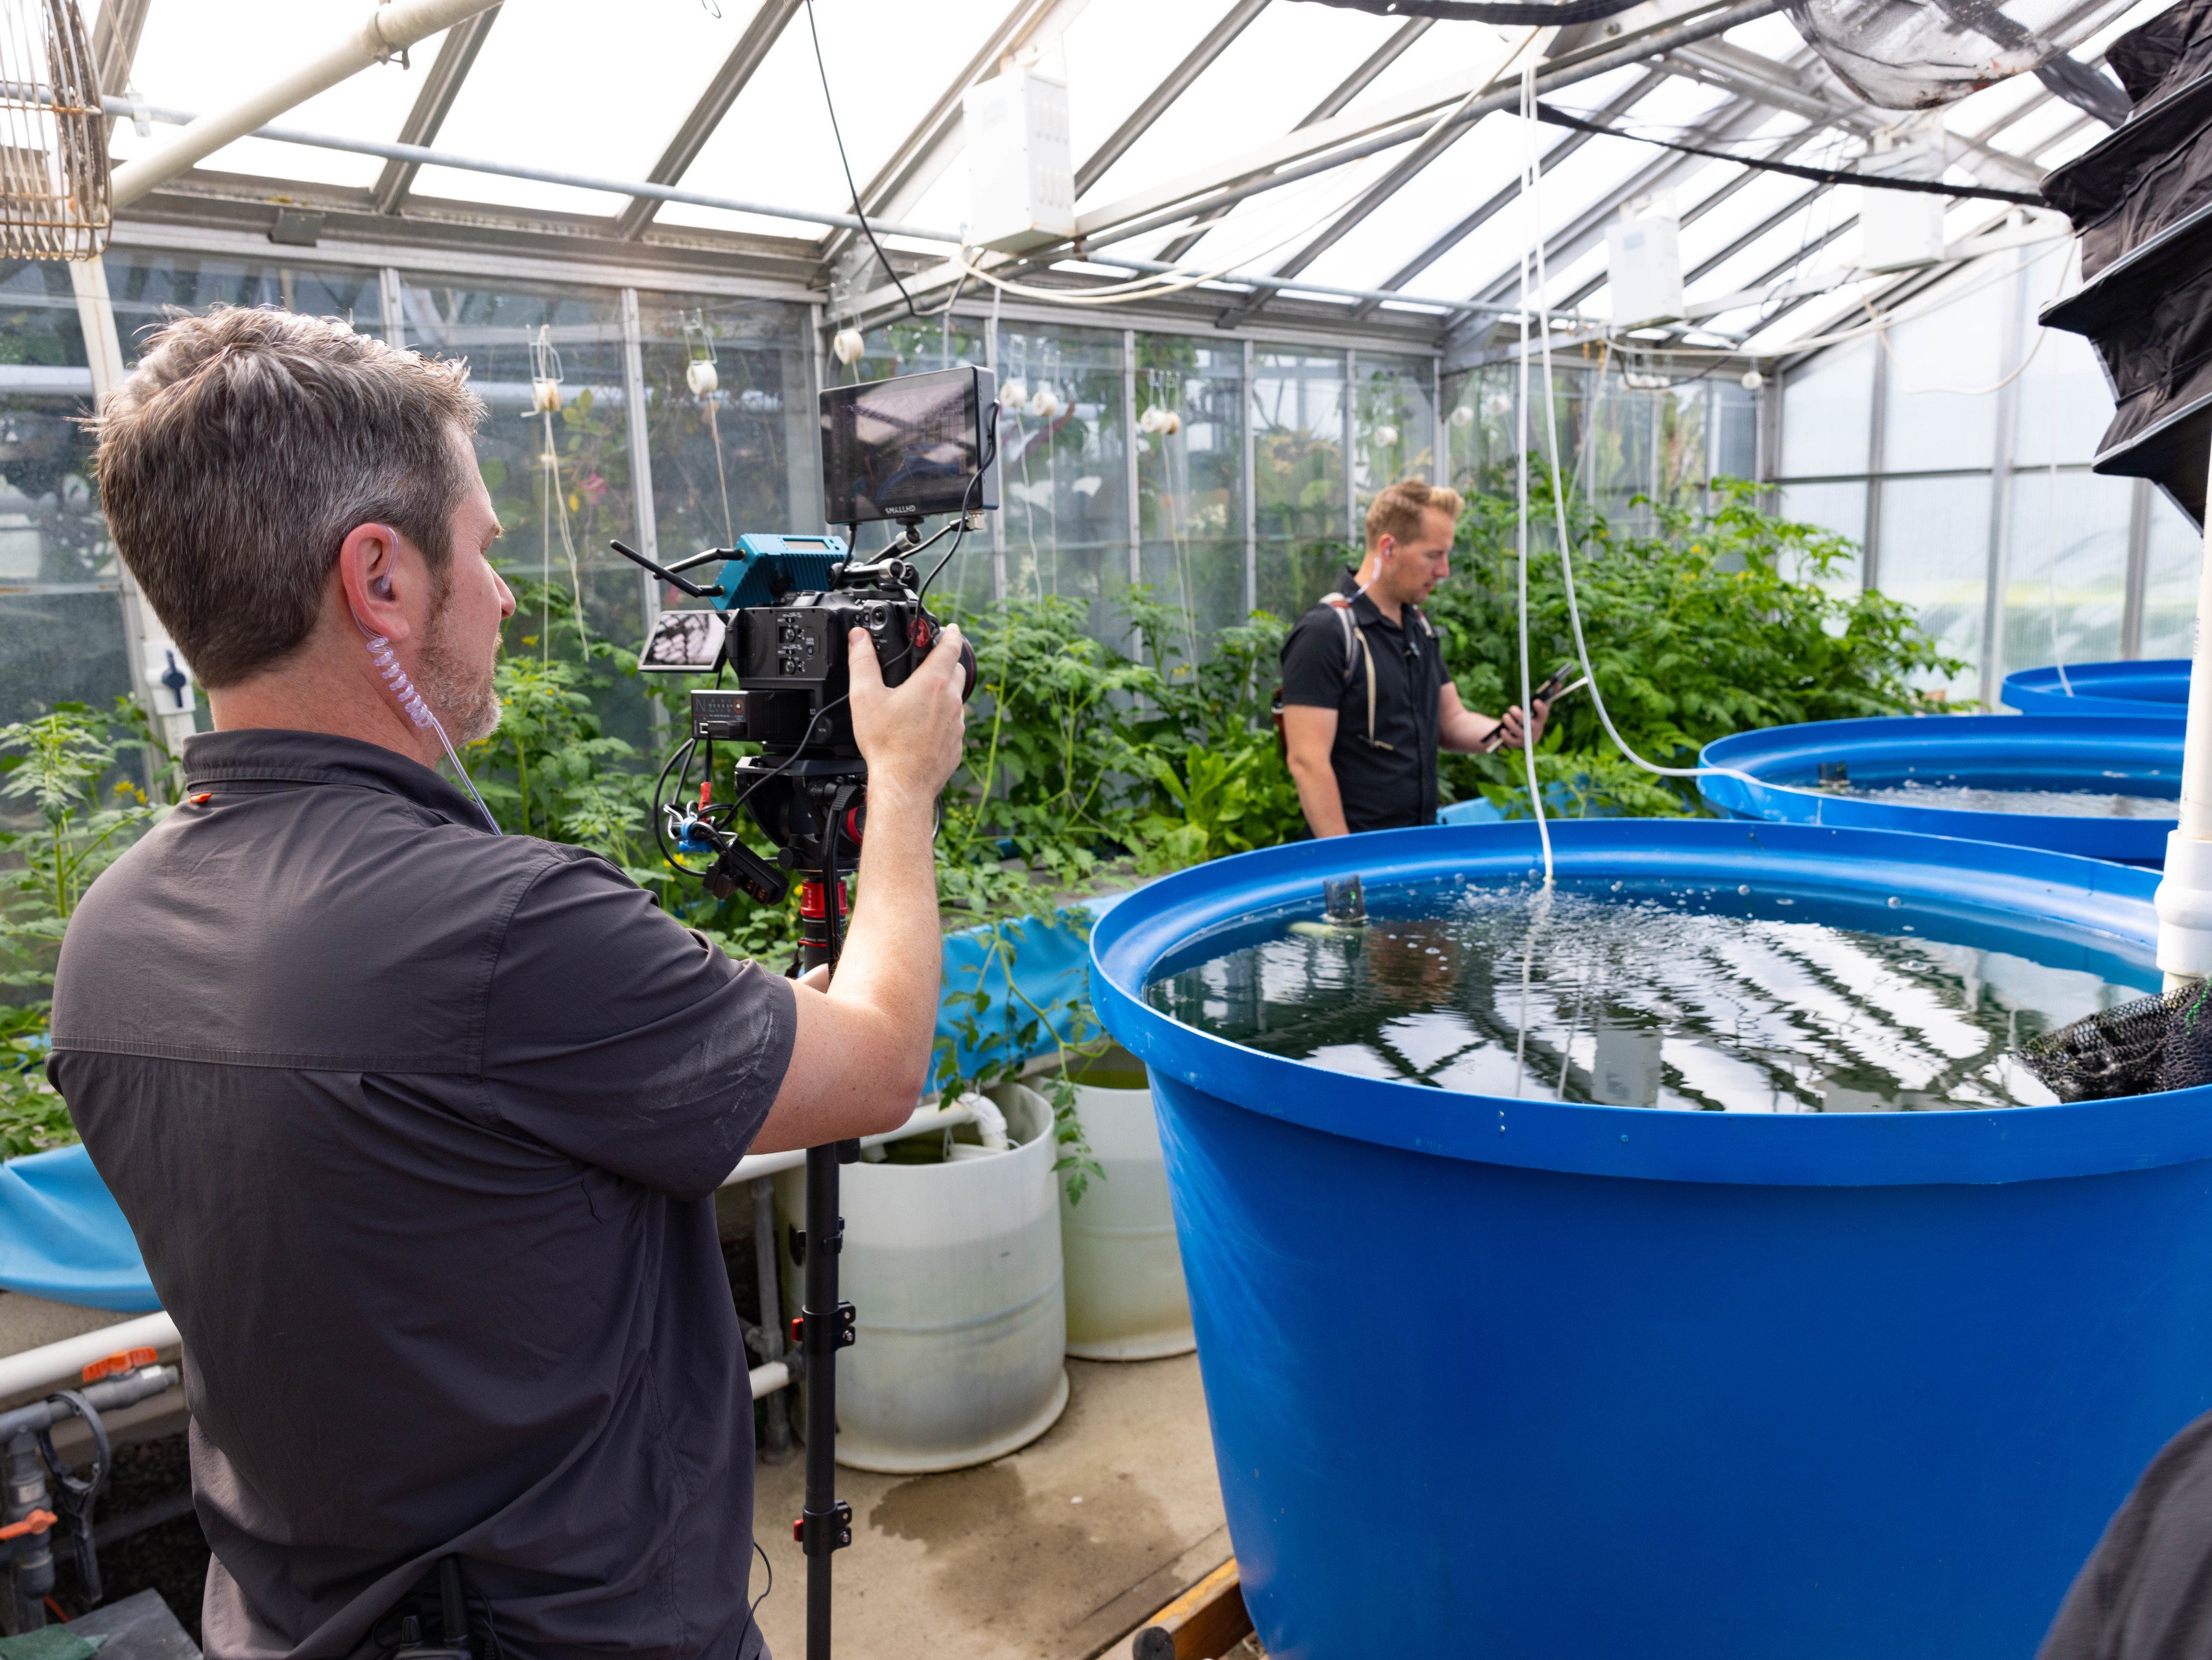 Two men with cameras record footage of a three-tank aquaponic system